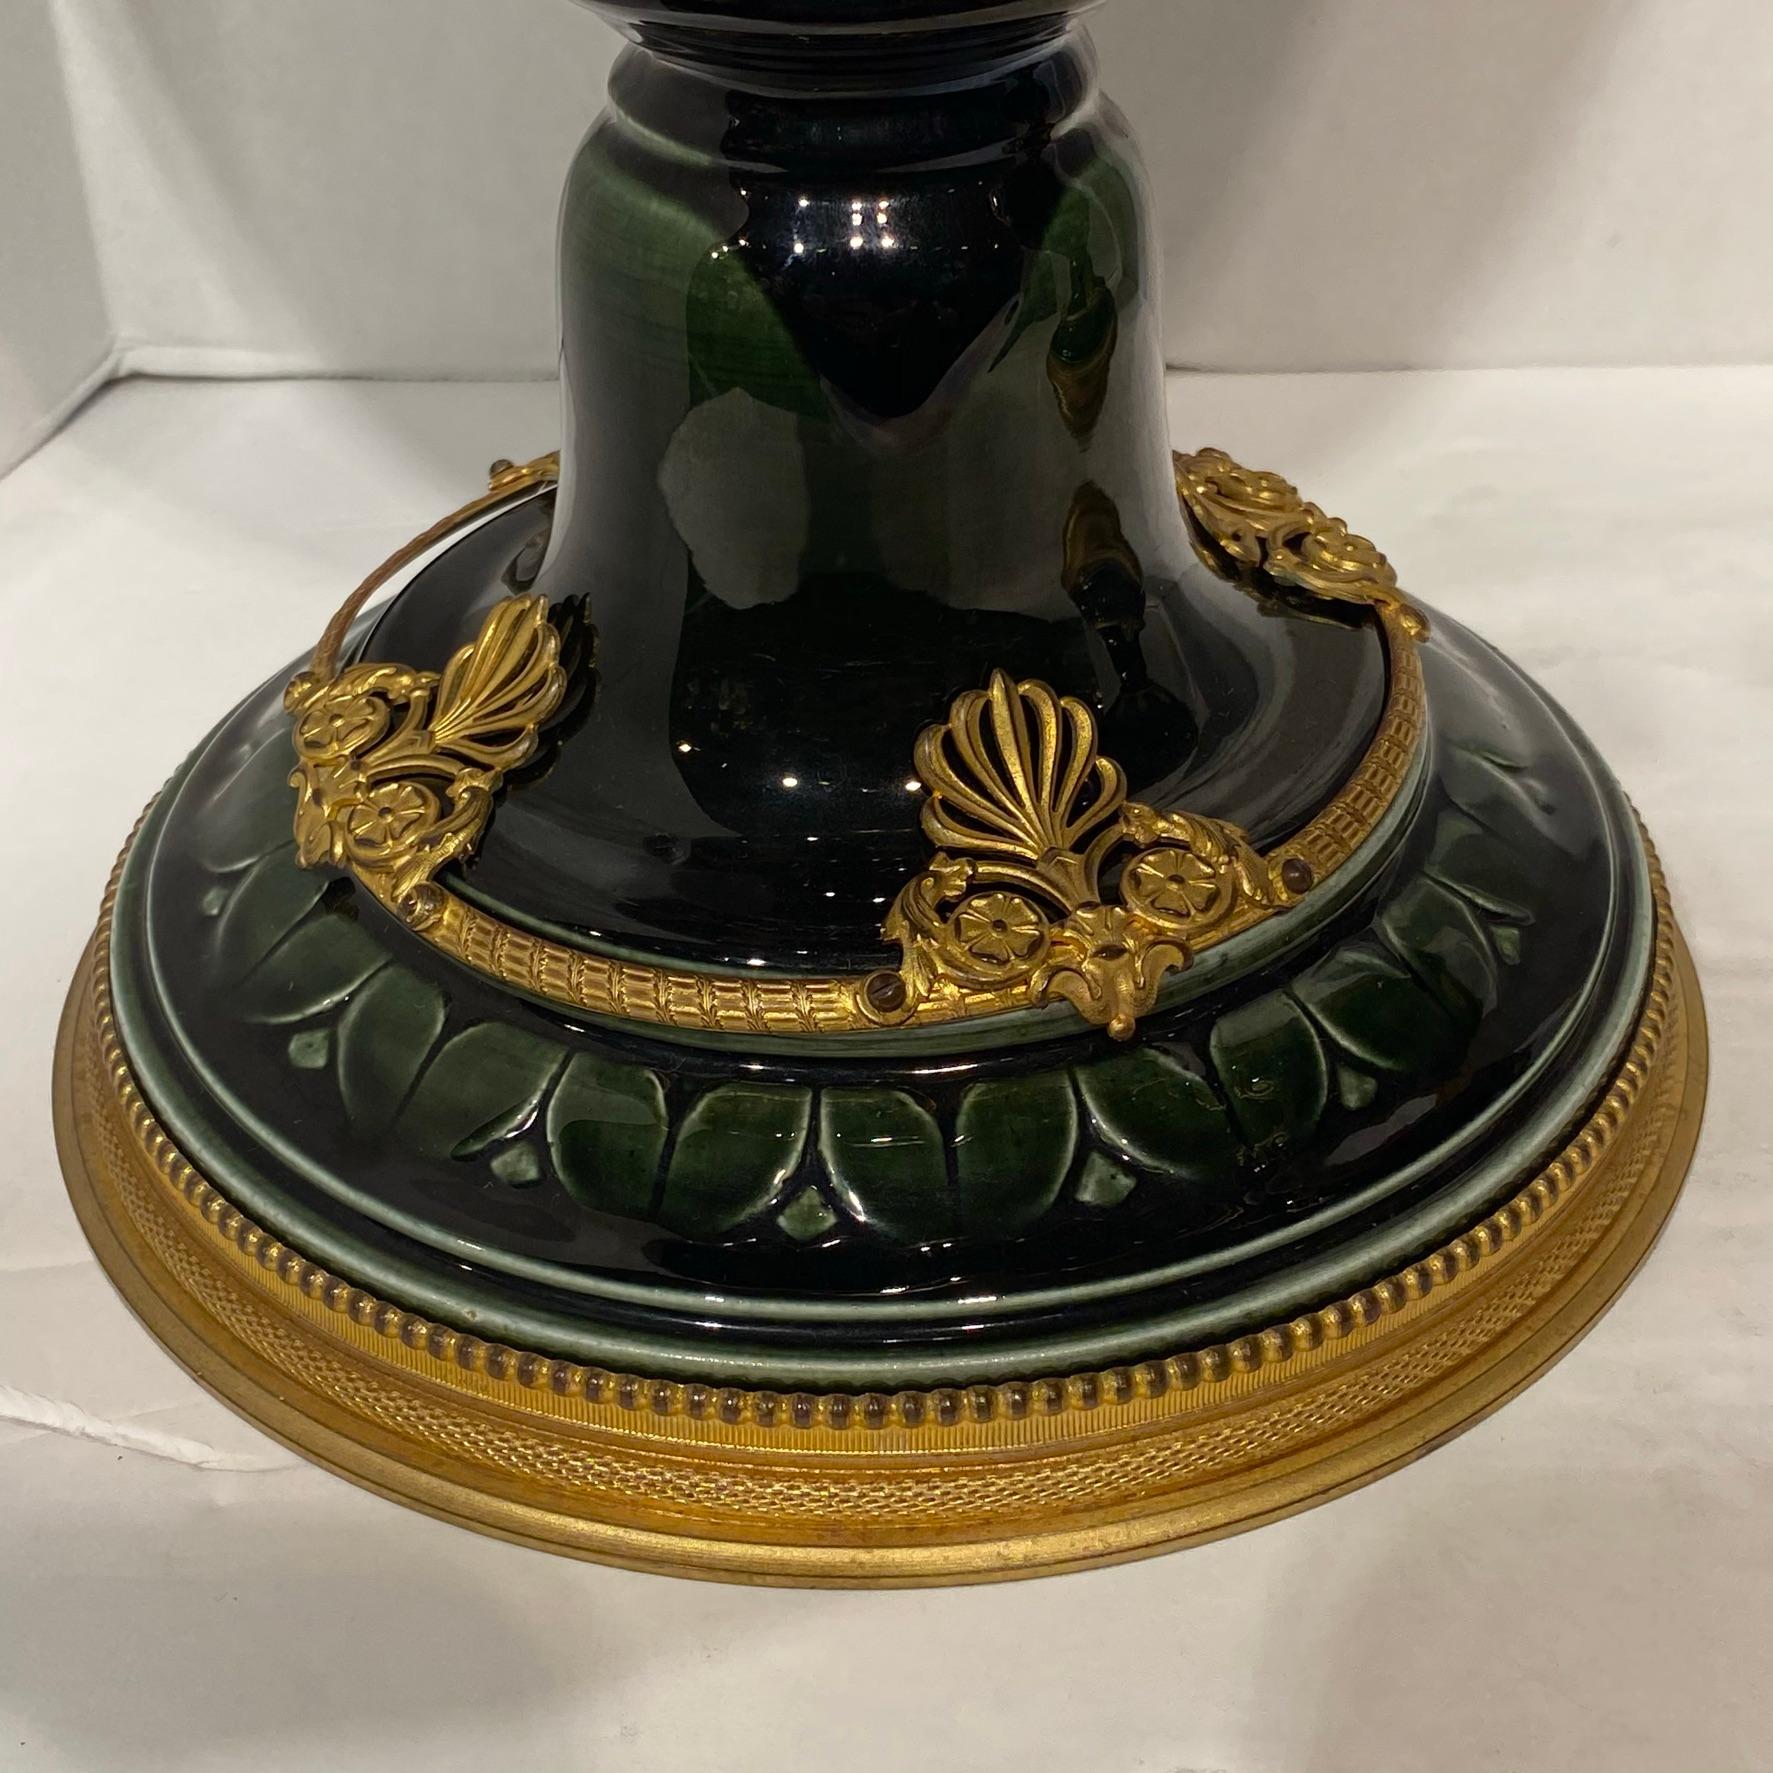 Iridescent Glazed Faience Vases with Neoclassical Gilt Bronze Mounts For Sale 9